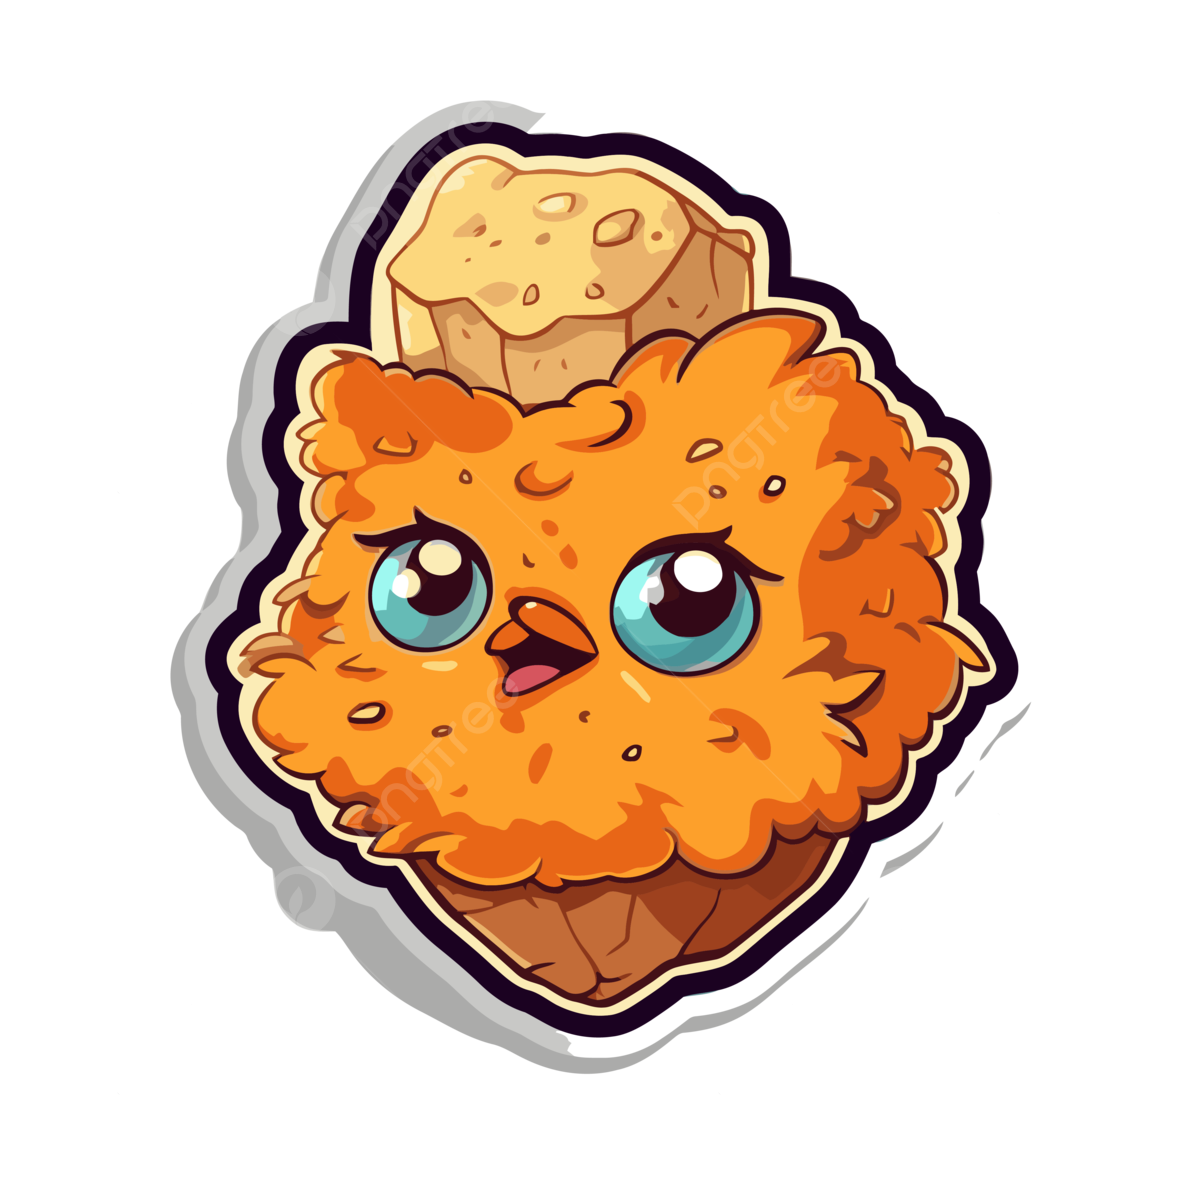 Number fried chicken nuggets vector art png images free download on